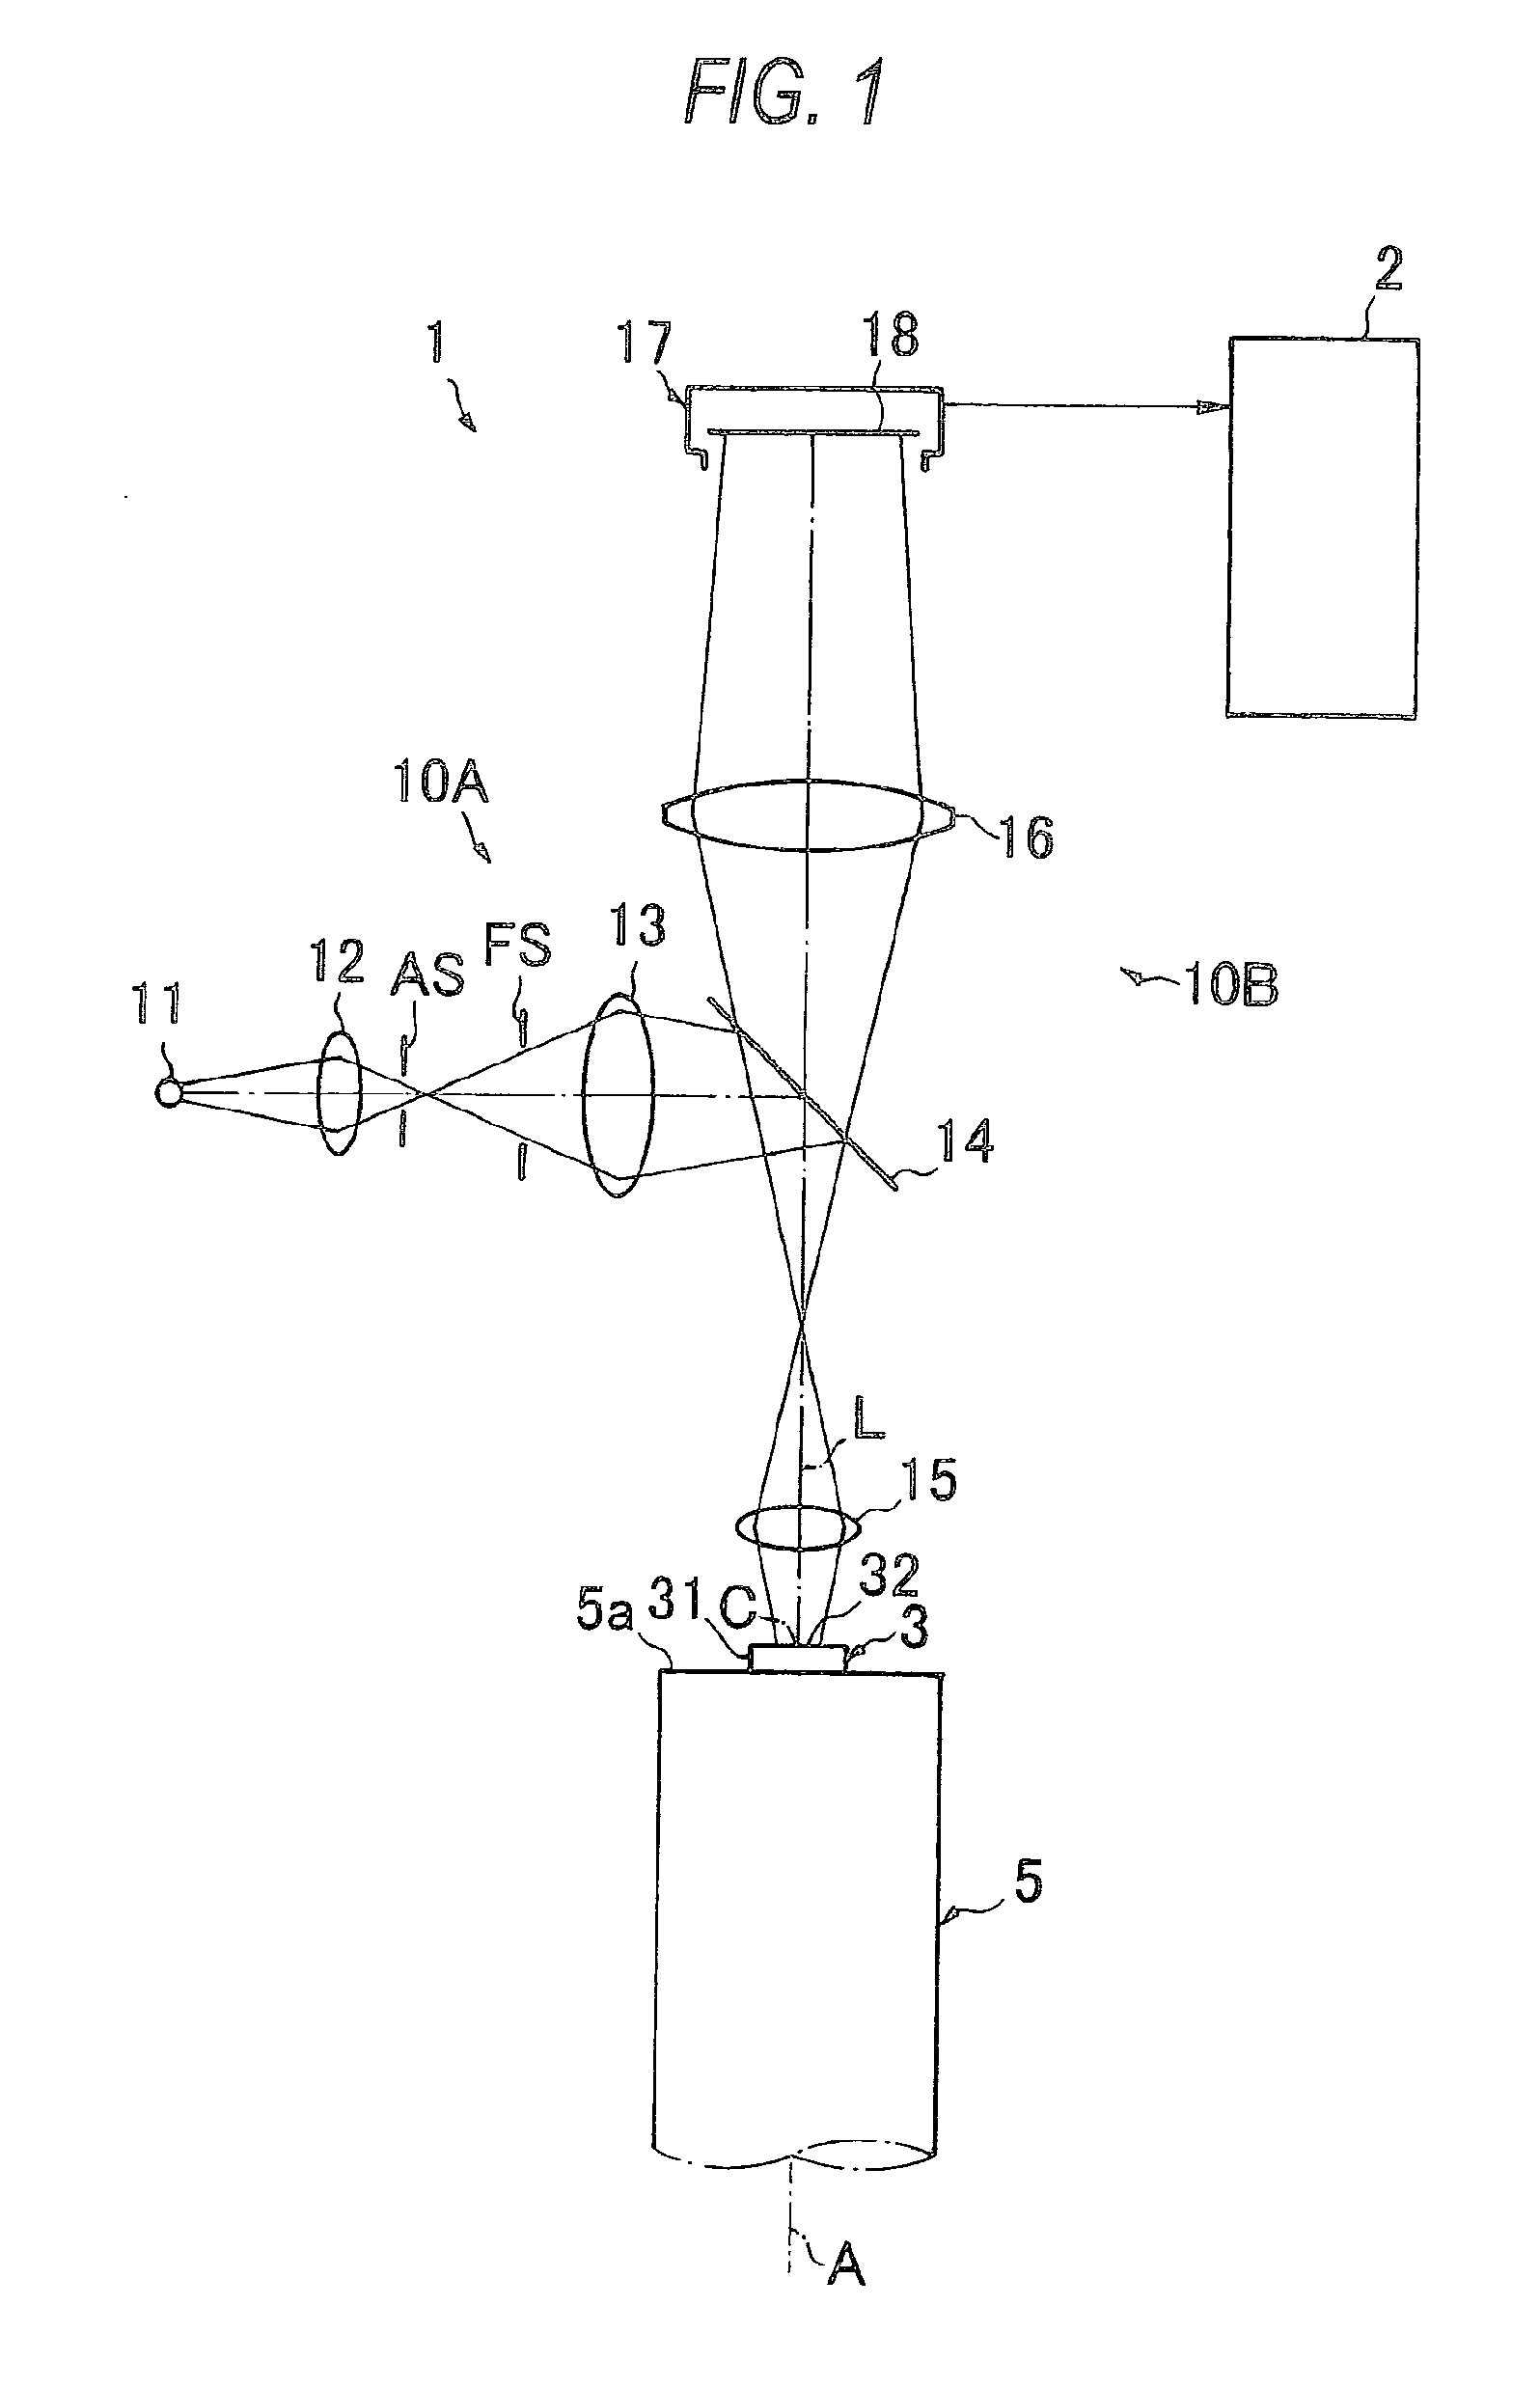 Method and apparatus of measuring positional variation of rotation center line